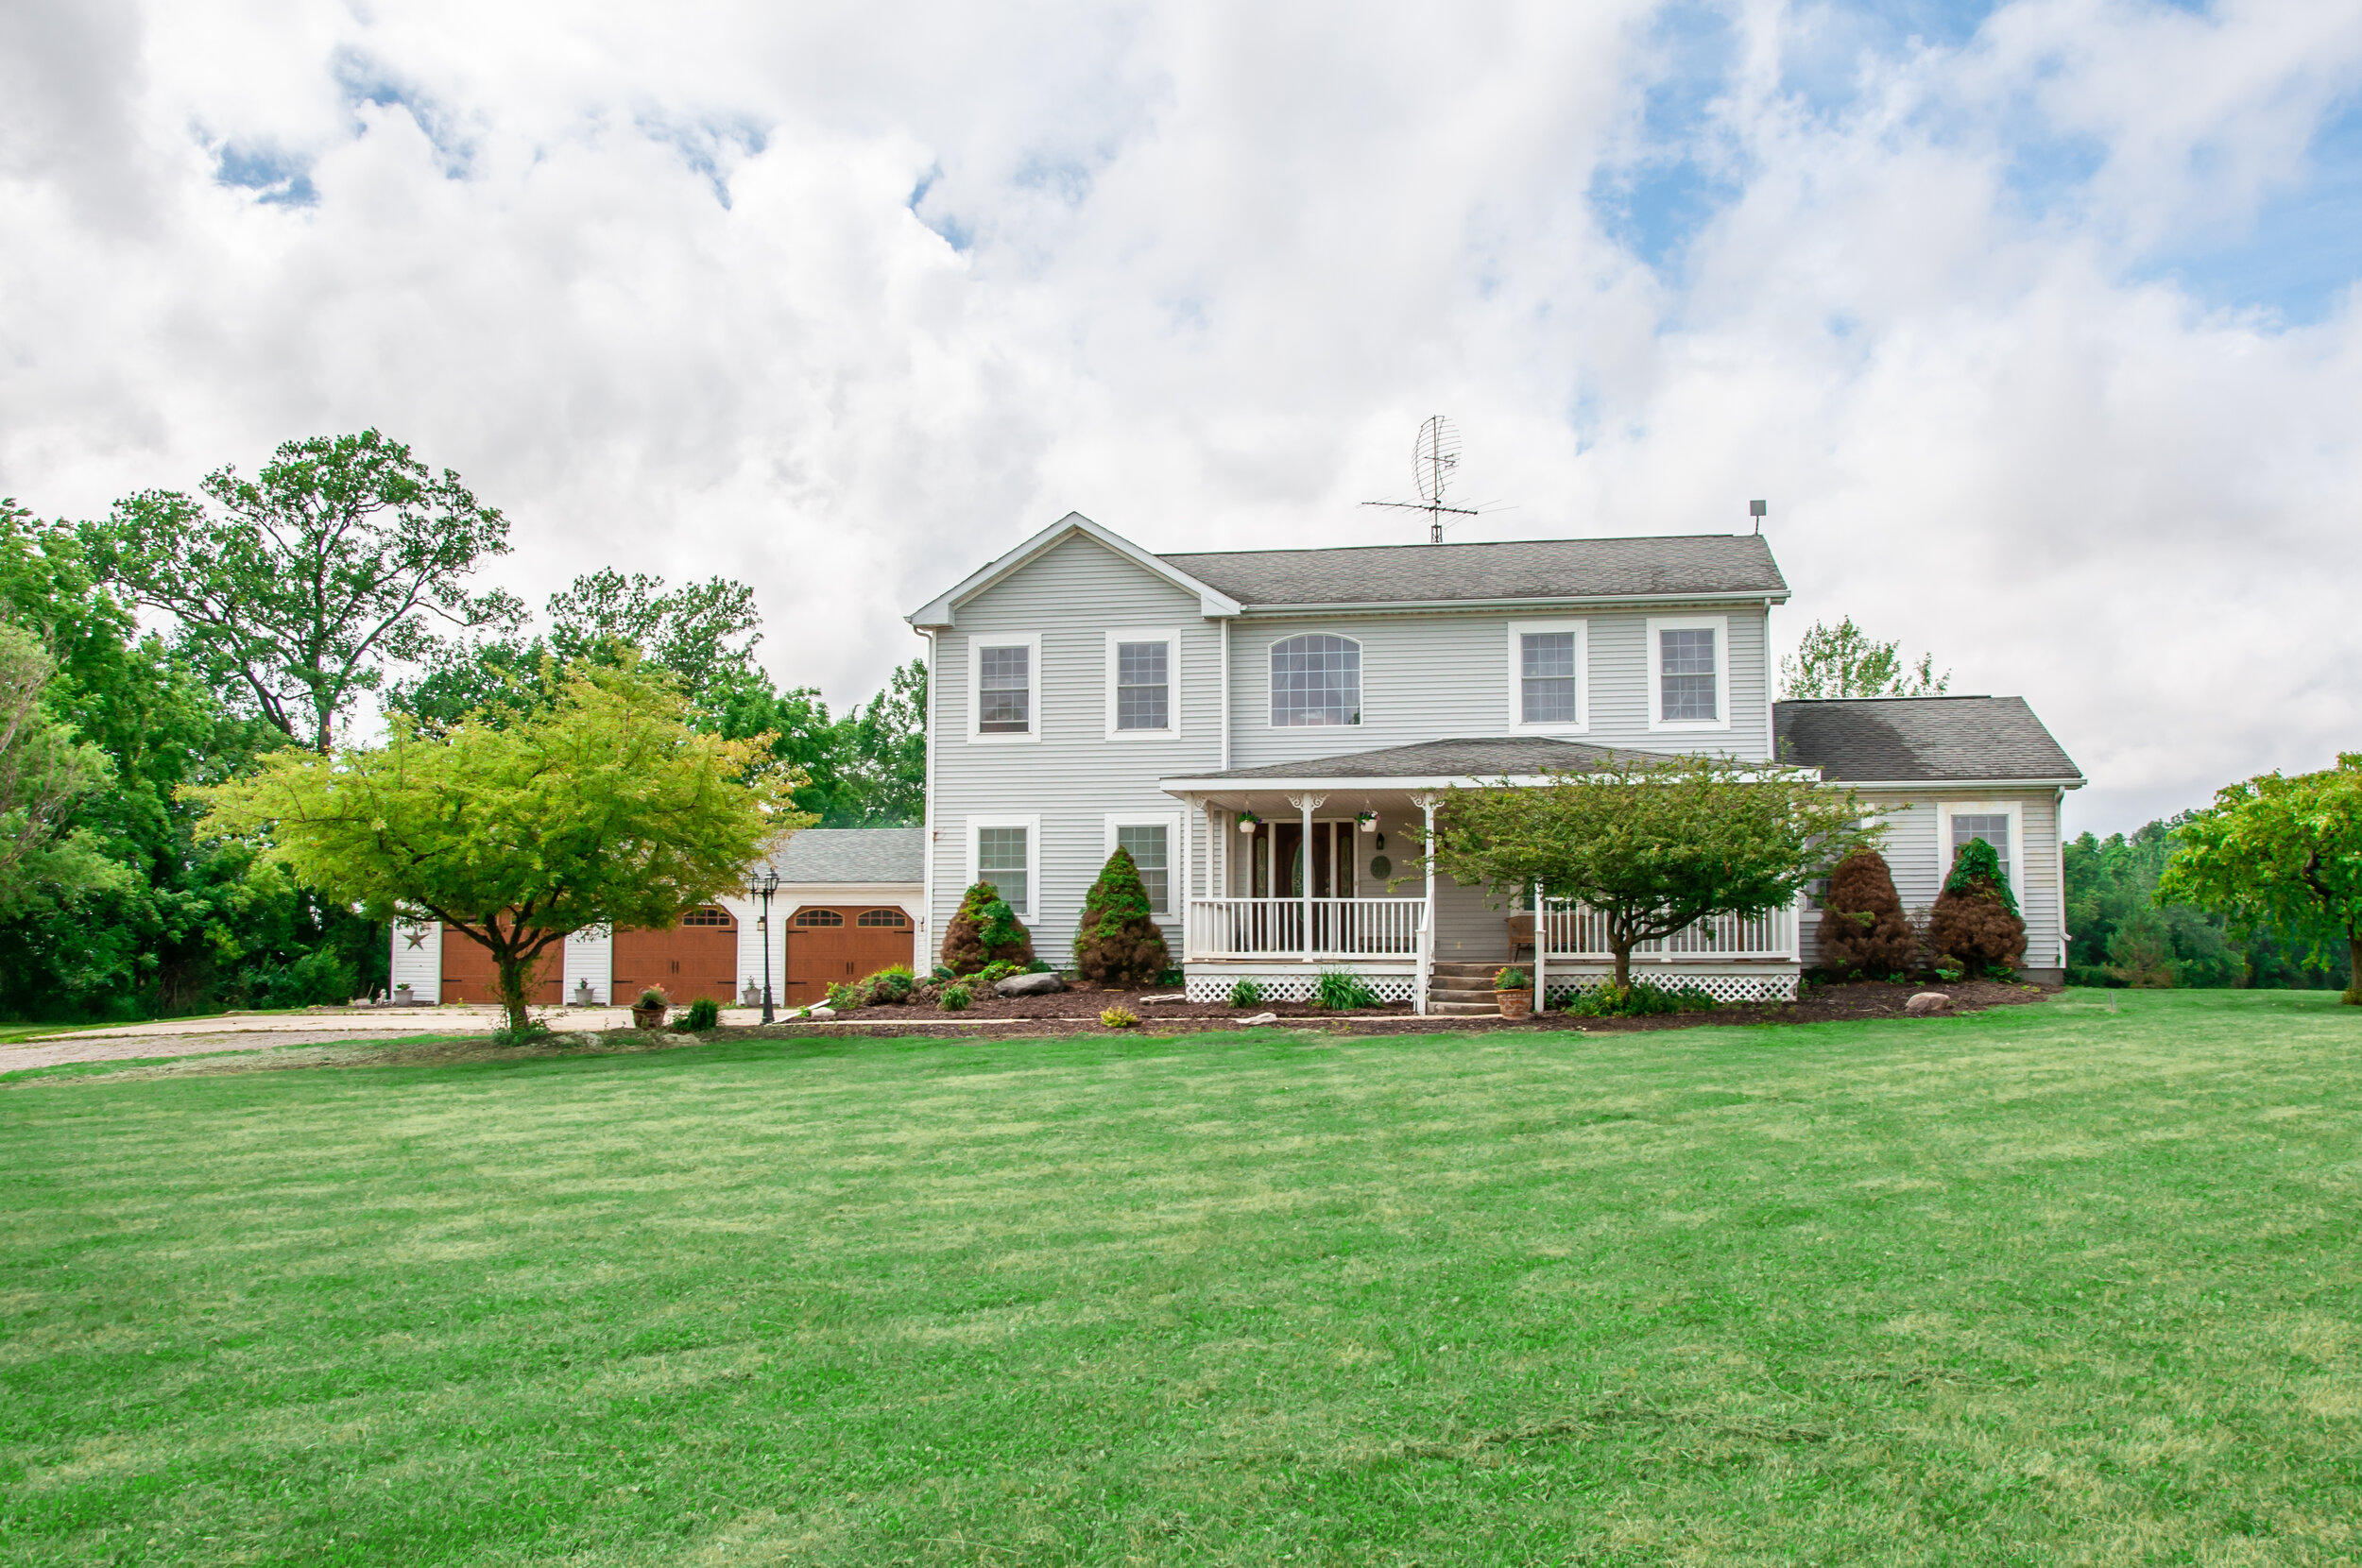 Bunker Hill Indiana Real Estate Photographer